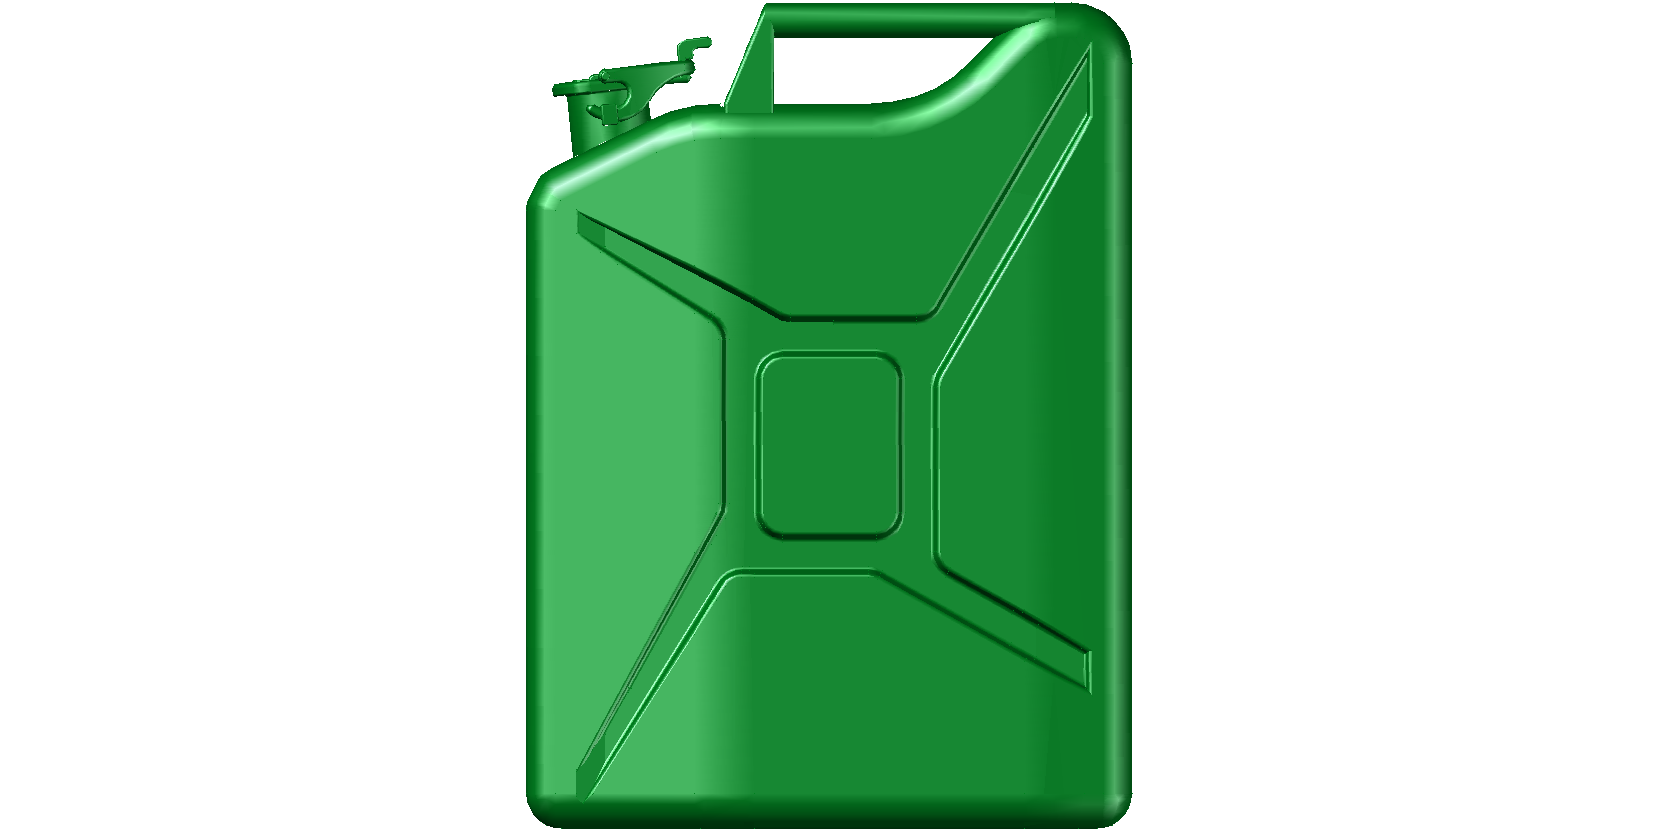 Jerrycan.png